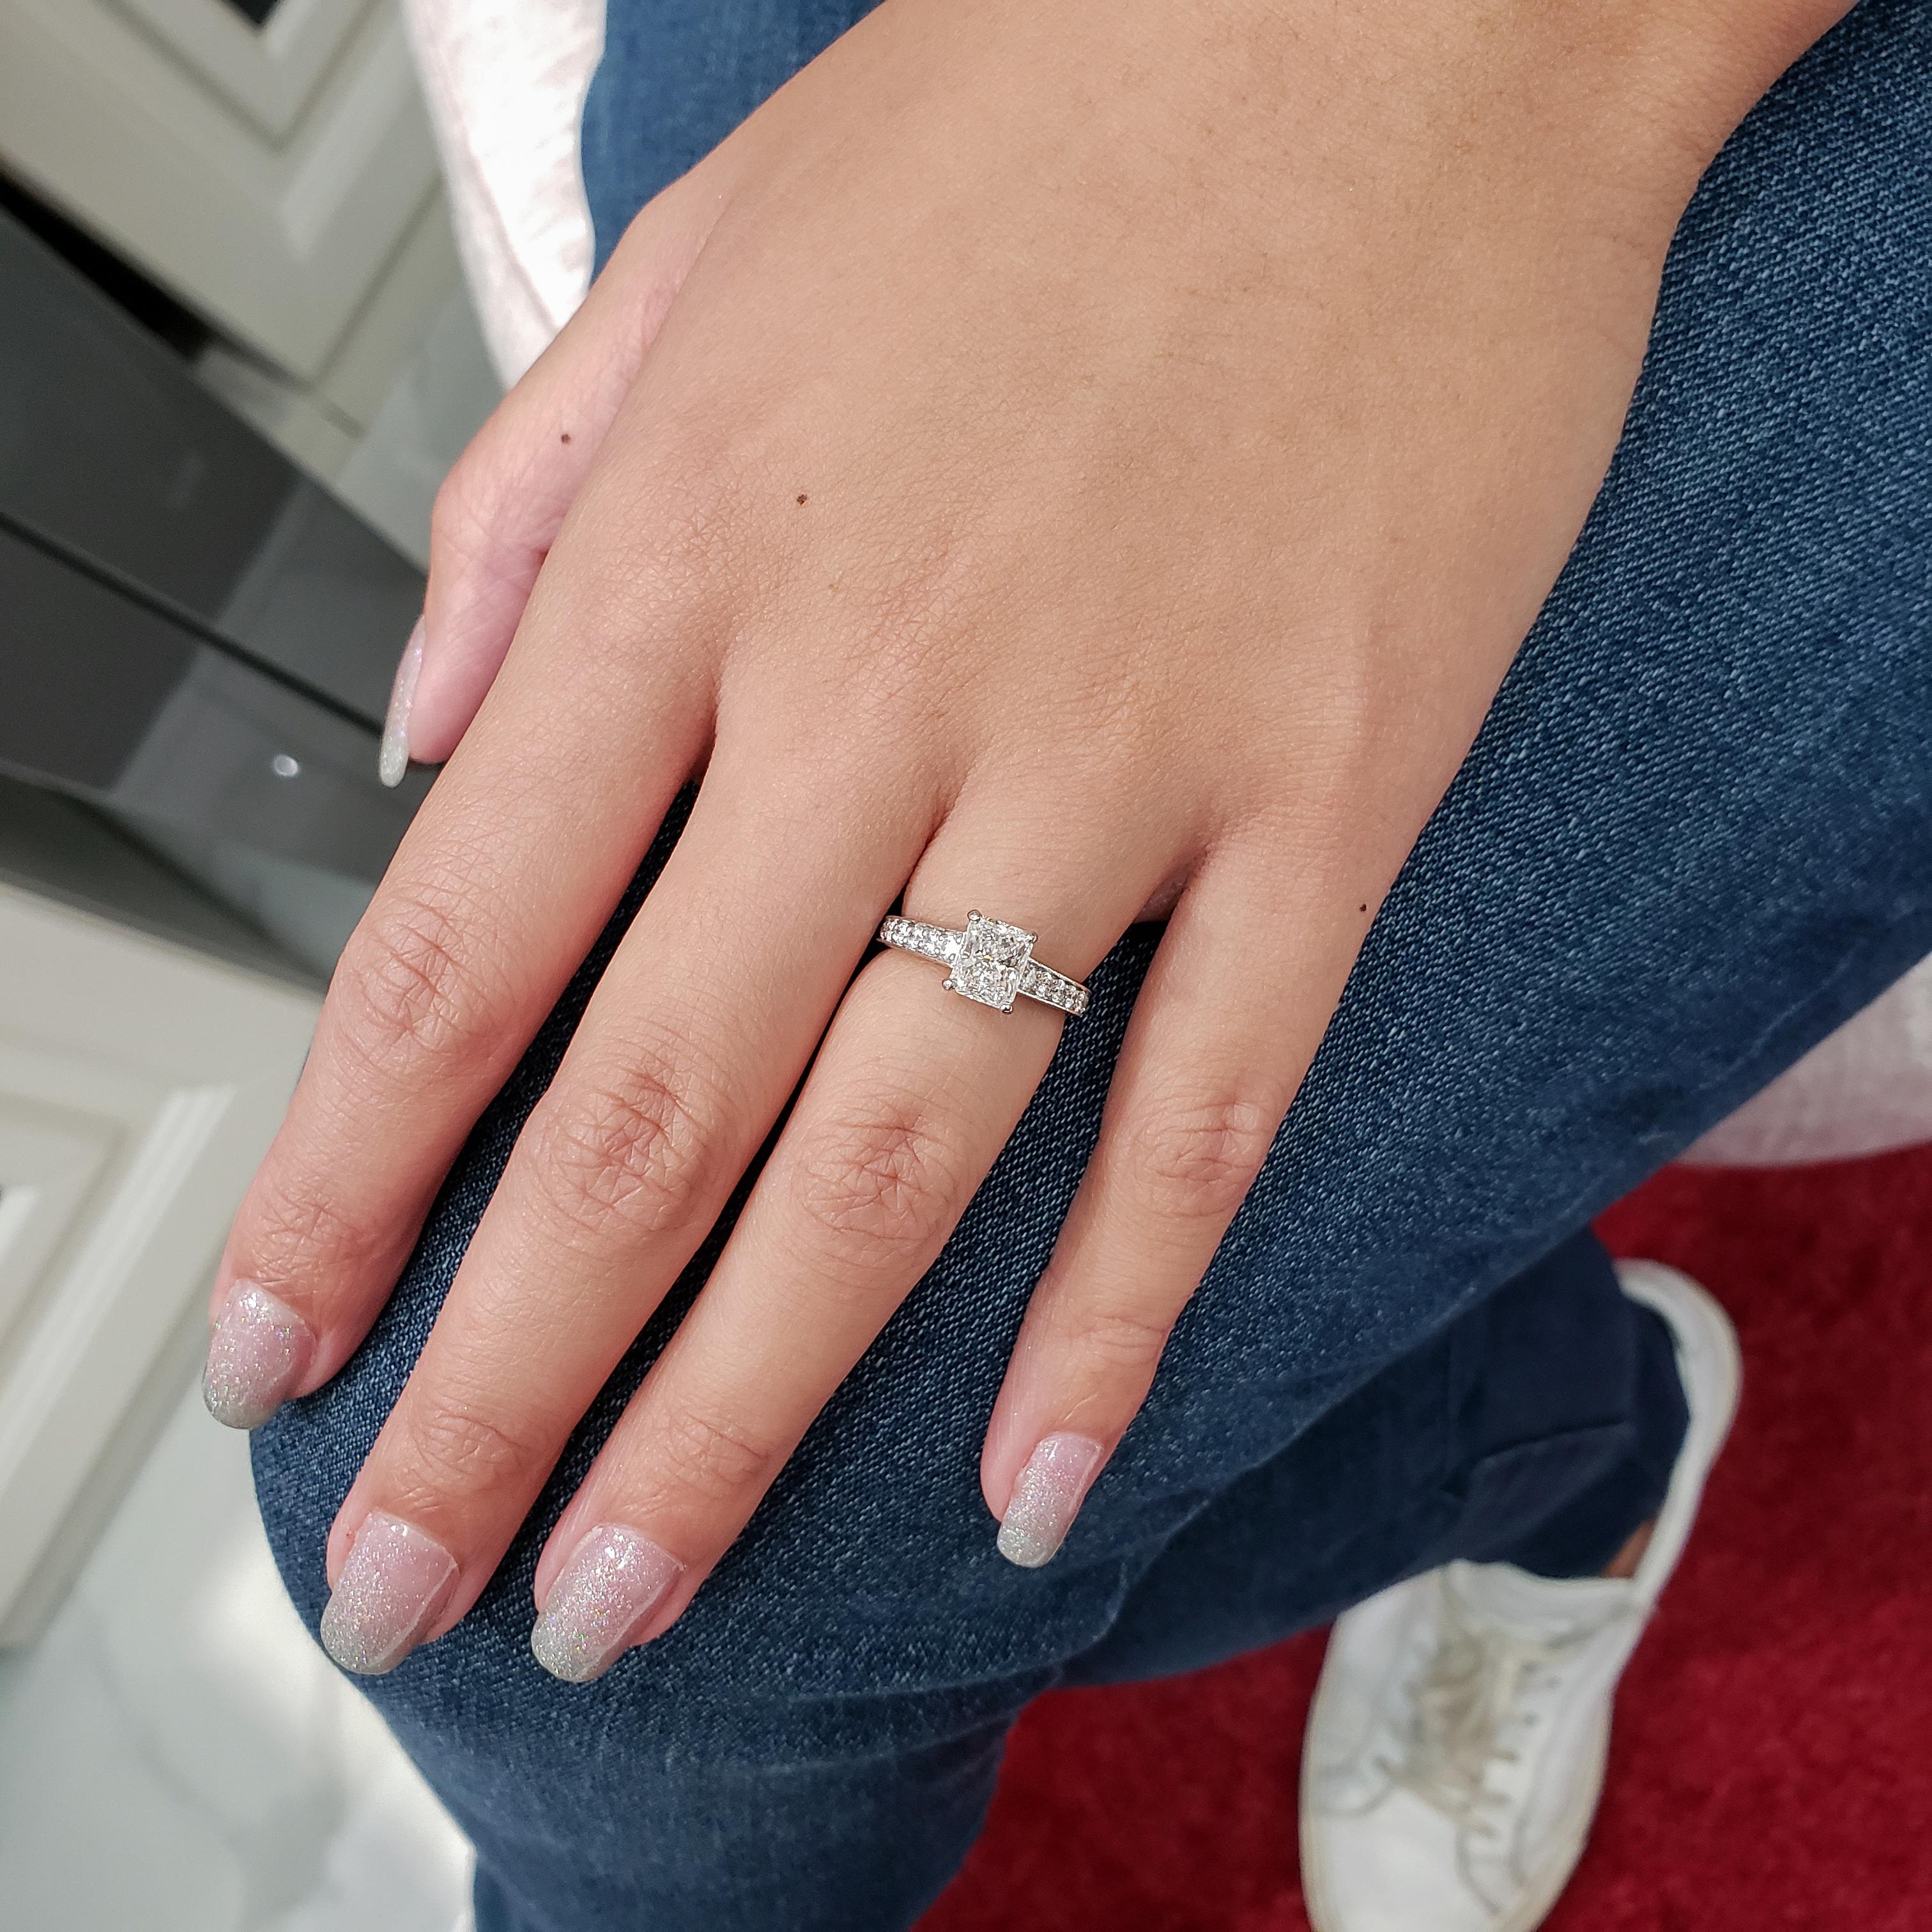 cartier round engagement ring